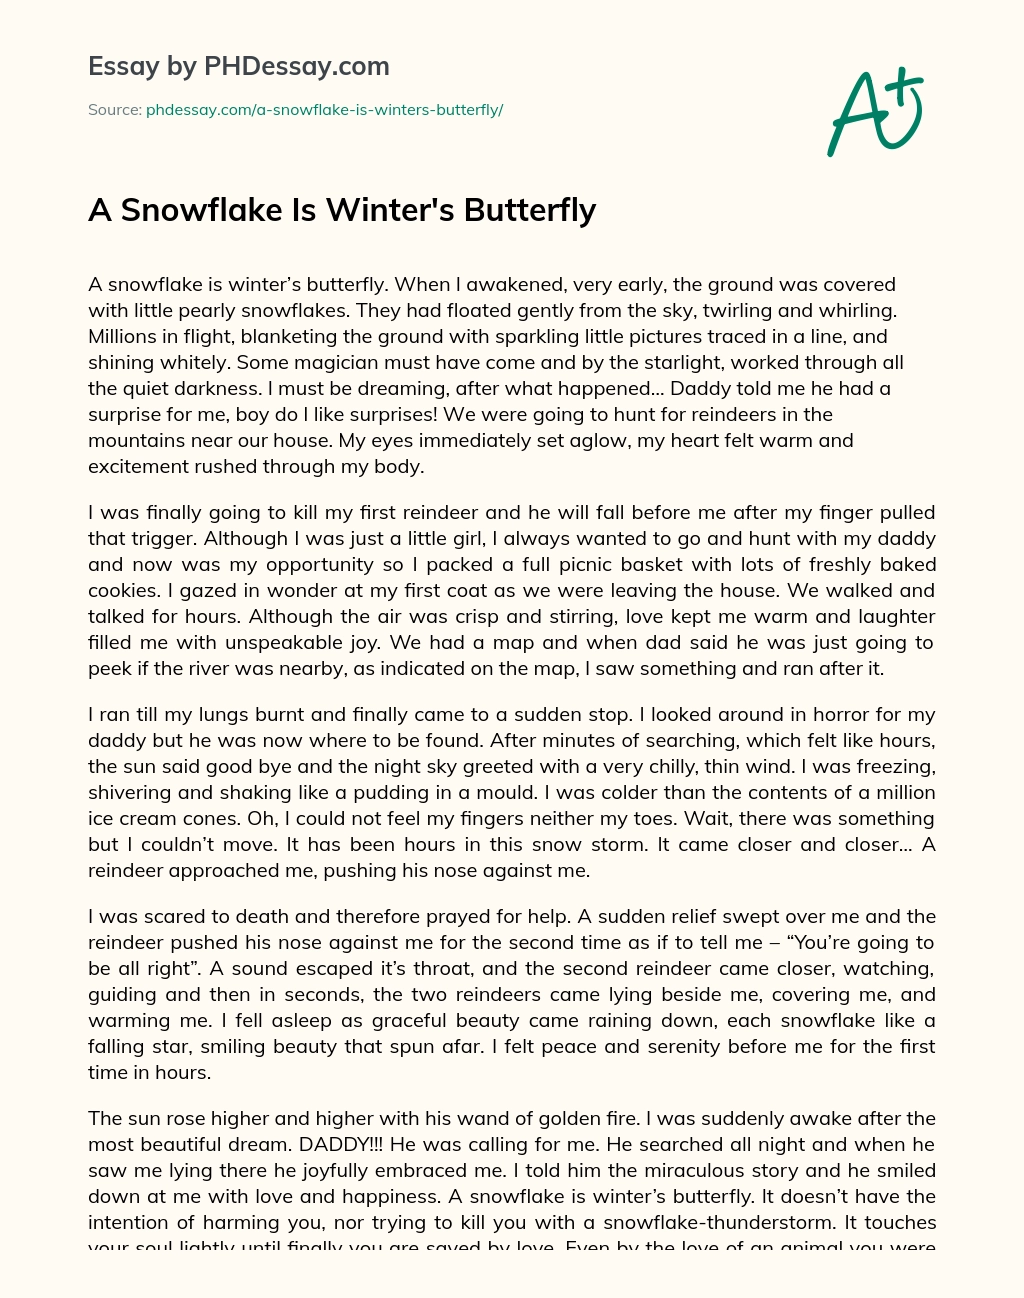 A Snowflake Is Winter’s Butterfly essay